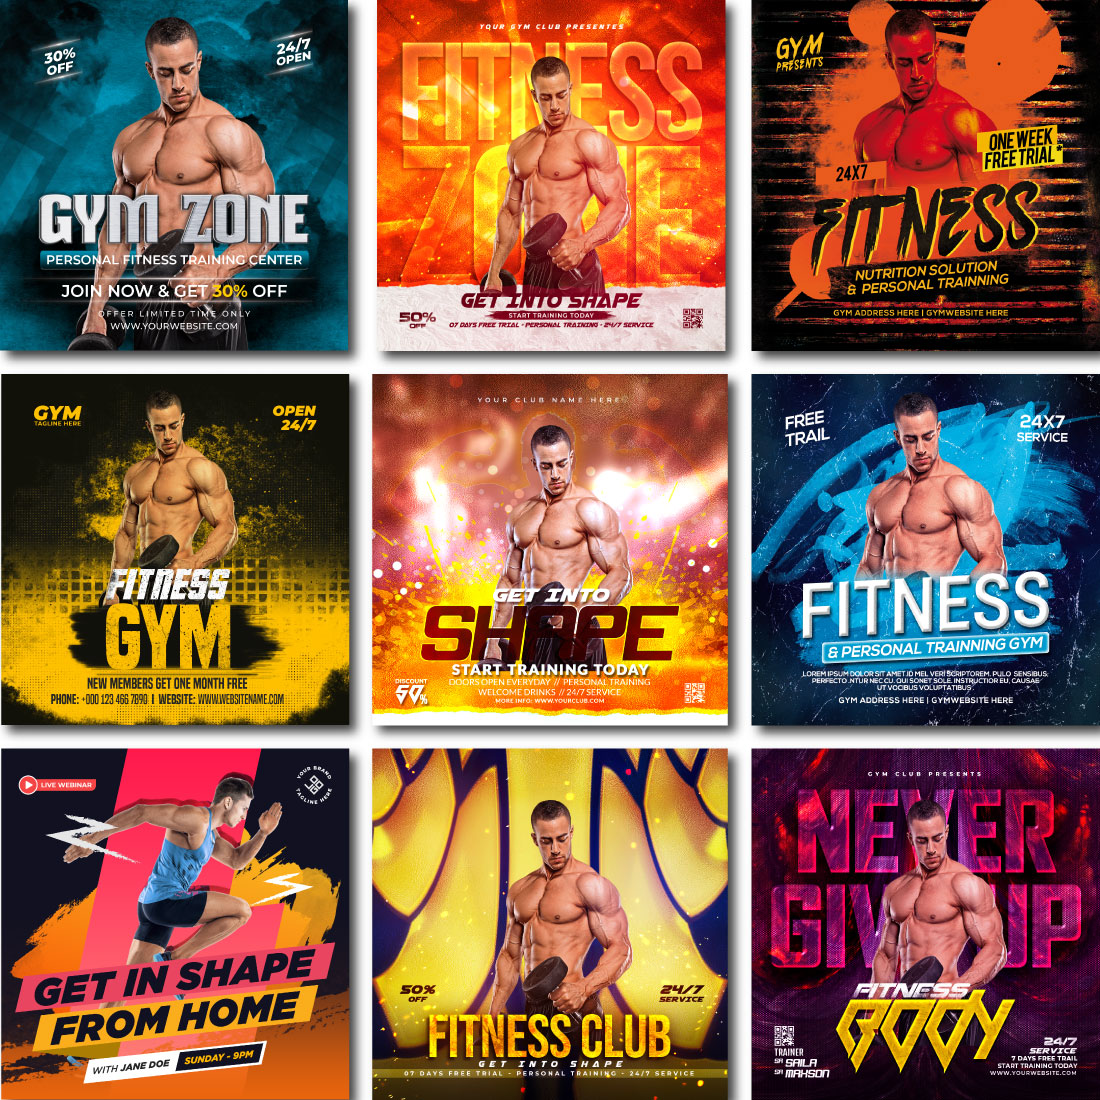 9 Fitness and Gym Banners Only $9 cover image.